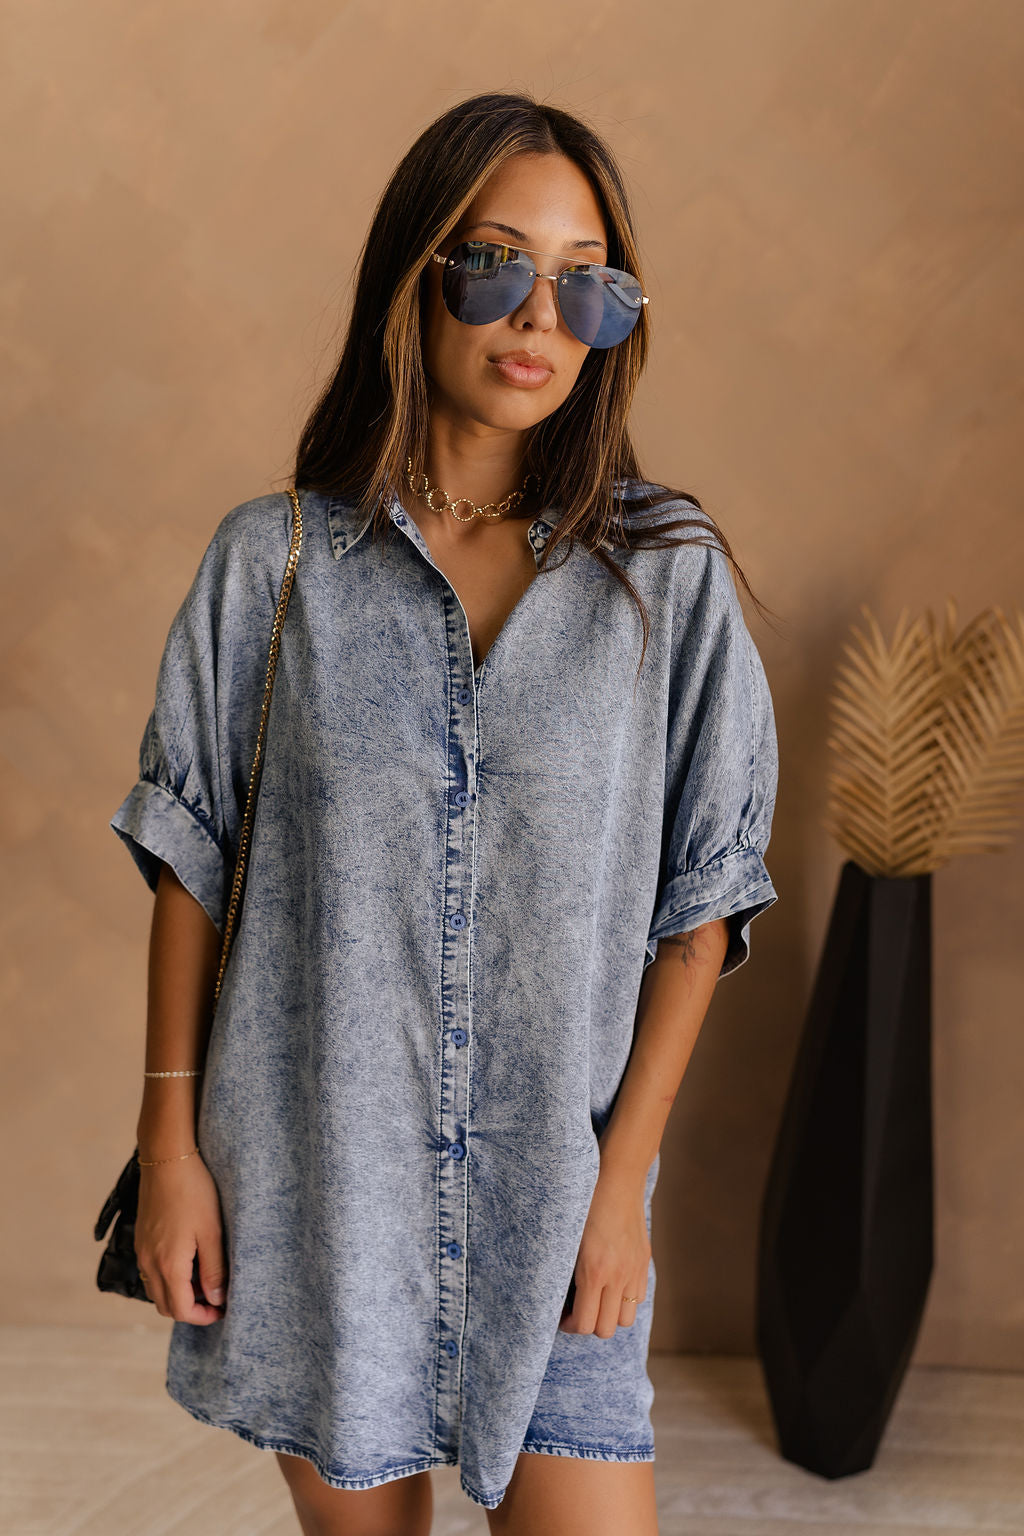 Front view of female model wearing the Emma Button-Up Short Sleeve Mini Dress in Washed Denim which features Tencel Fabric, Mini Length, Front Button-Up Closure, Collared Neckline and Short Puff Sleeves.